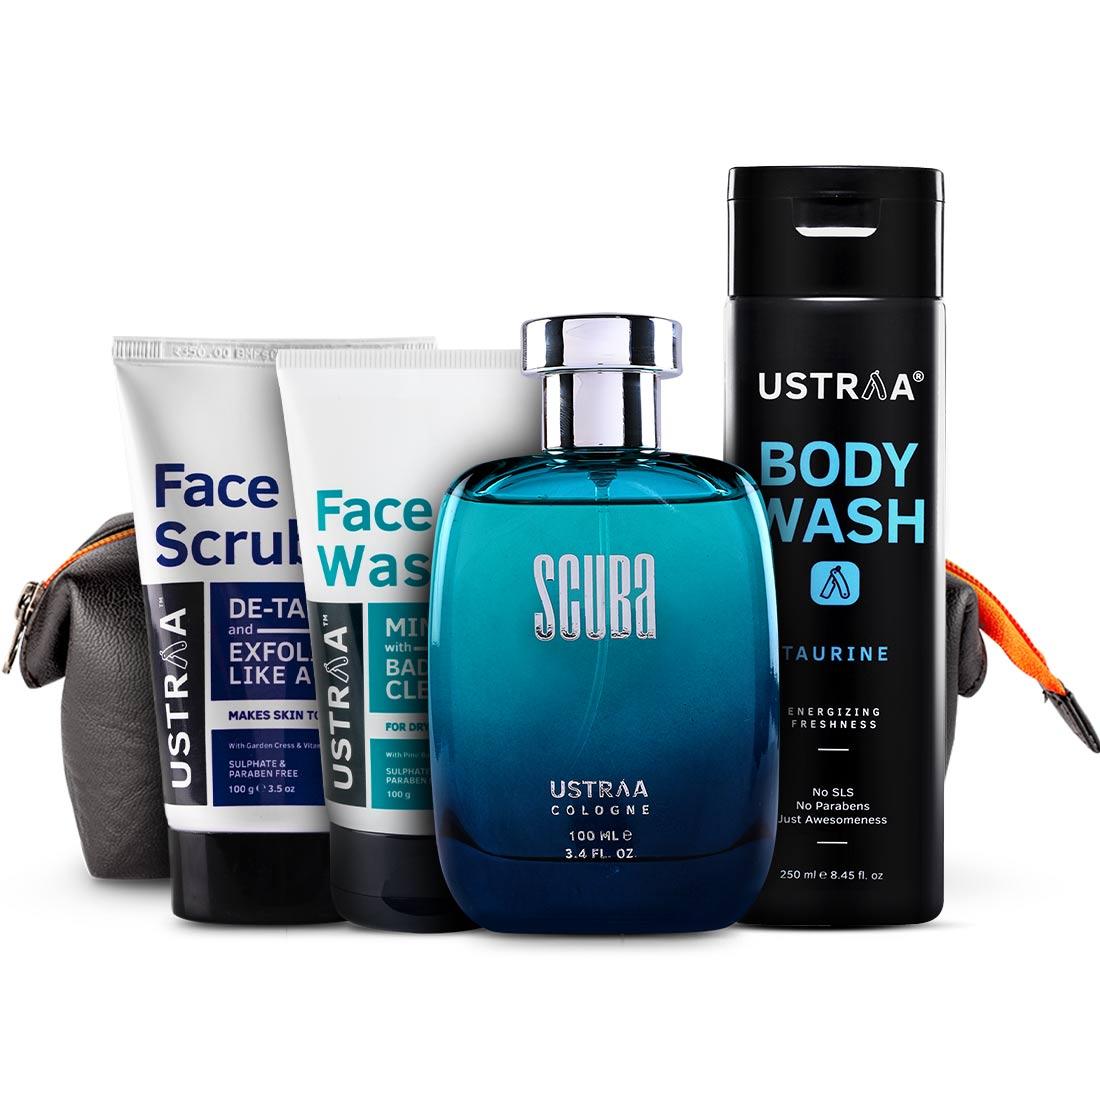 Ustraa Mountaineer Pack: Scuba Cologne, De Tan Face Scrub, Taurine Body Wash, Dry Skin Face Wash